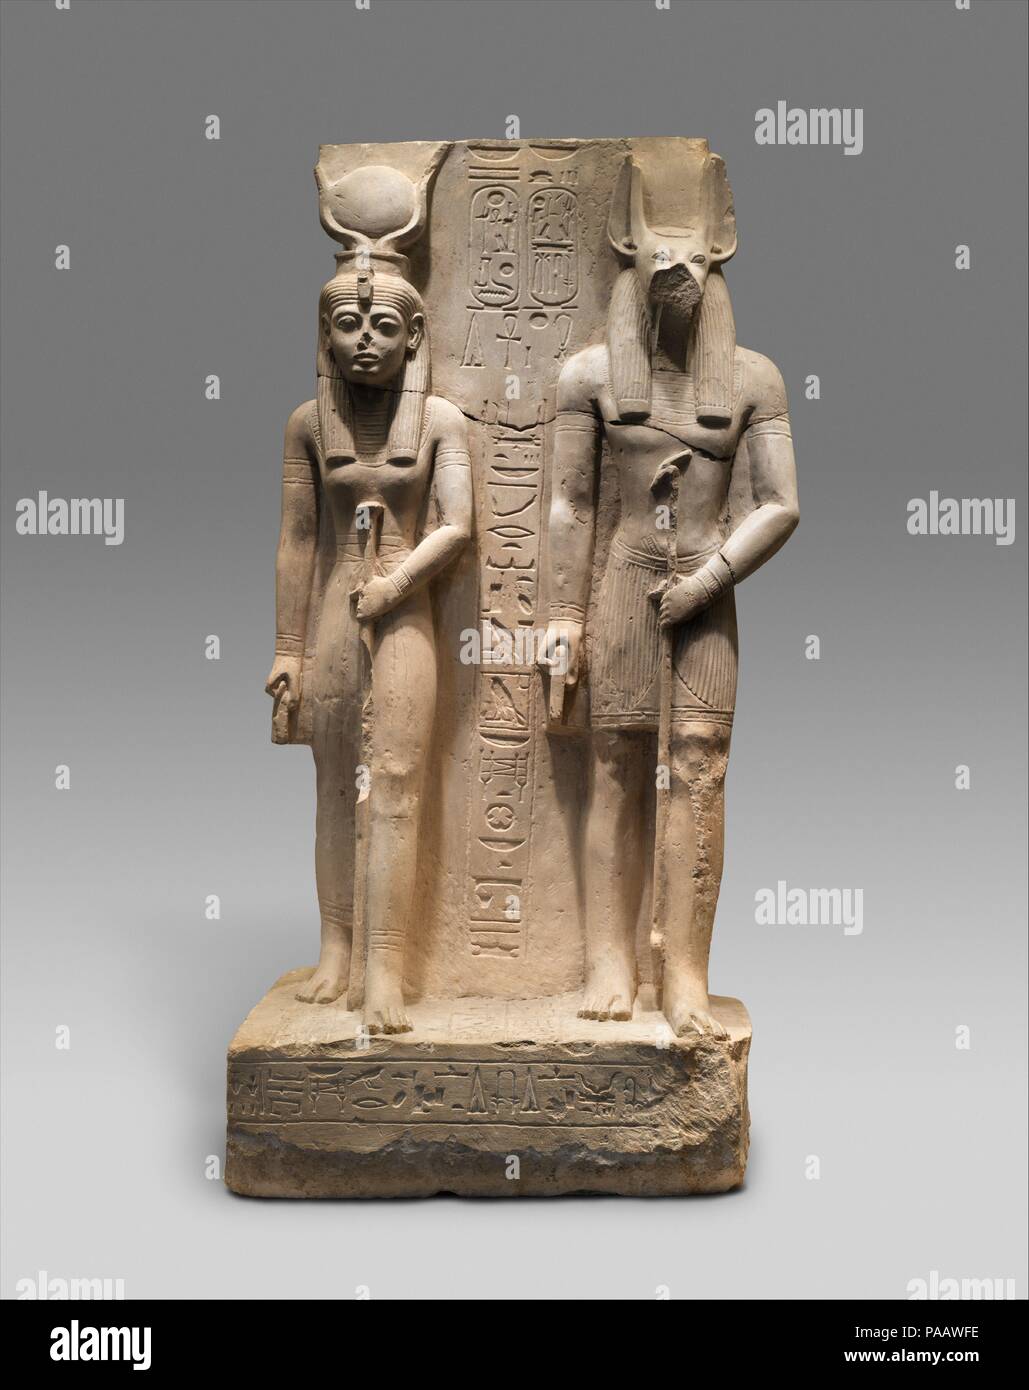 Isis and Wepwawet, god of Asyut,with the name of Siese,Overseer of the Two Granaries of Ramesses II. Dimensions: H. 129 (50 13/16 in); w 64 cm (25 3/16 in); d. 43 cm (16 15/16 in). Dynasty: Dynasty 19. Reign: reign of Ramesses II. Date: ca. 1279-1213 B.C..  The Royal Scribe and Overseer of the Granaries, Siase, dedicated this statue which represents Isis, his patron goddess, and Wepwawet, the local god of Assiut where the statue was made.  Its fine but rather provincial style is the work of sculptors who were somewhat removed from the mainstream of the royal workshops.  However, many of their  Stock Photo